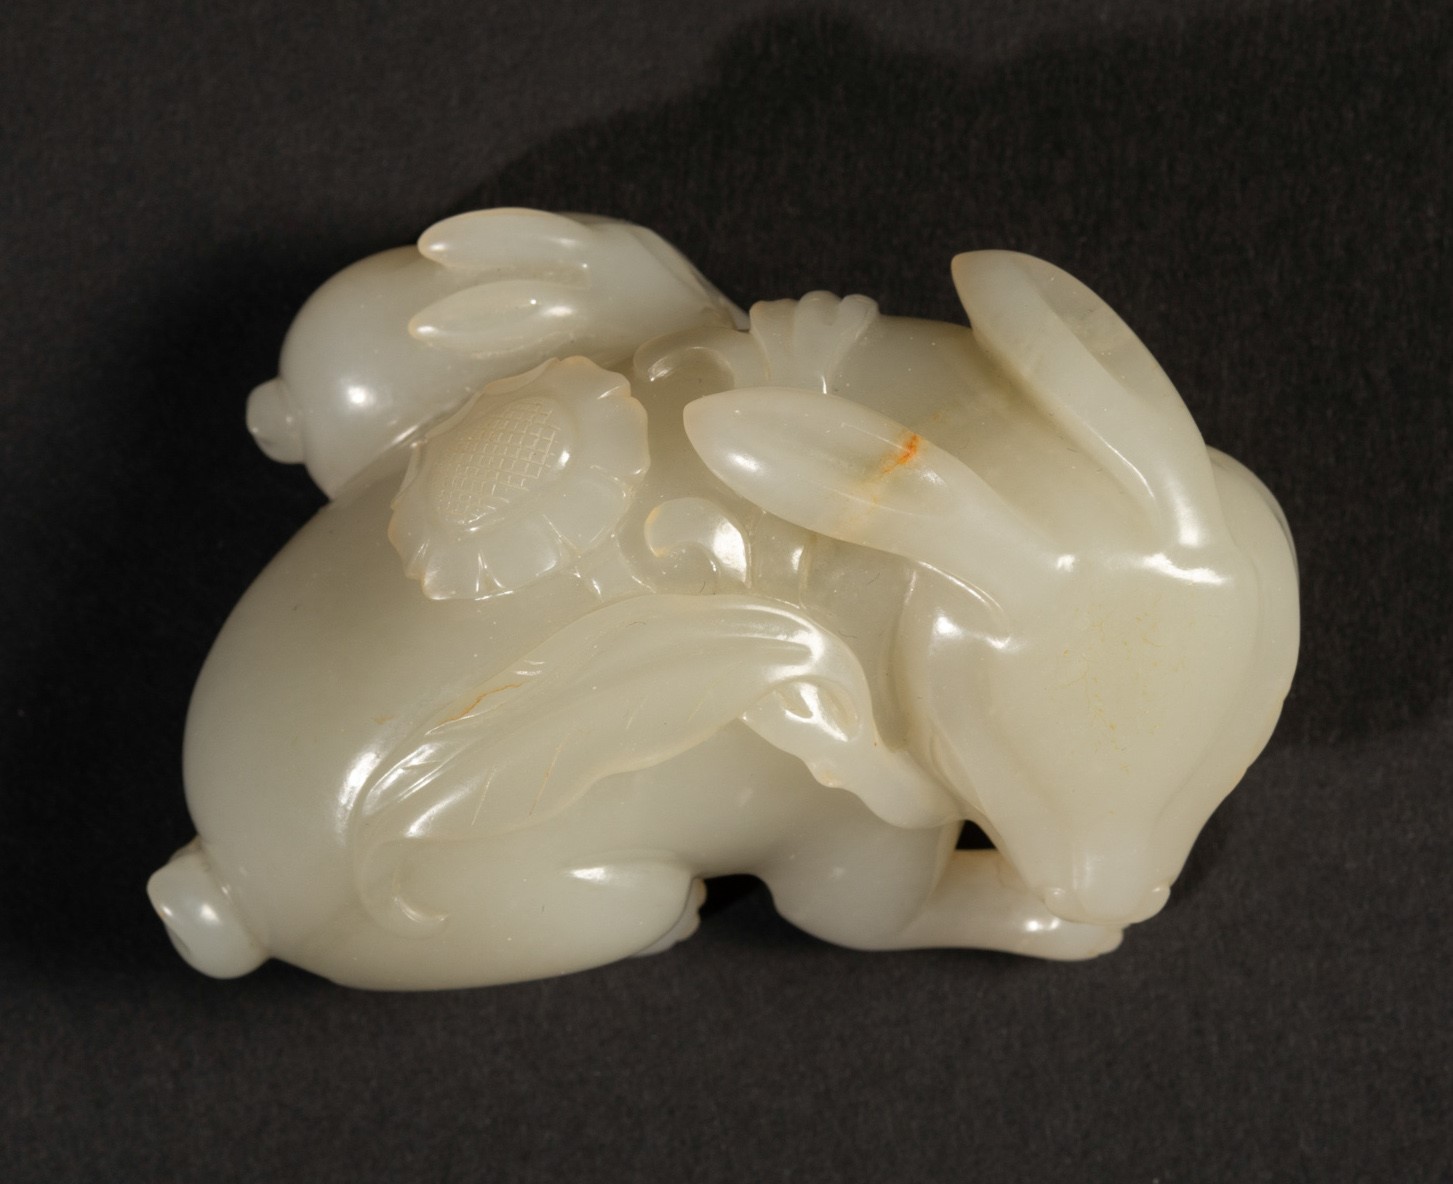 A small Celadon jade group, China, Qing Dynasty - 19th century. 8x5cm - - Image 3 of 4